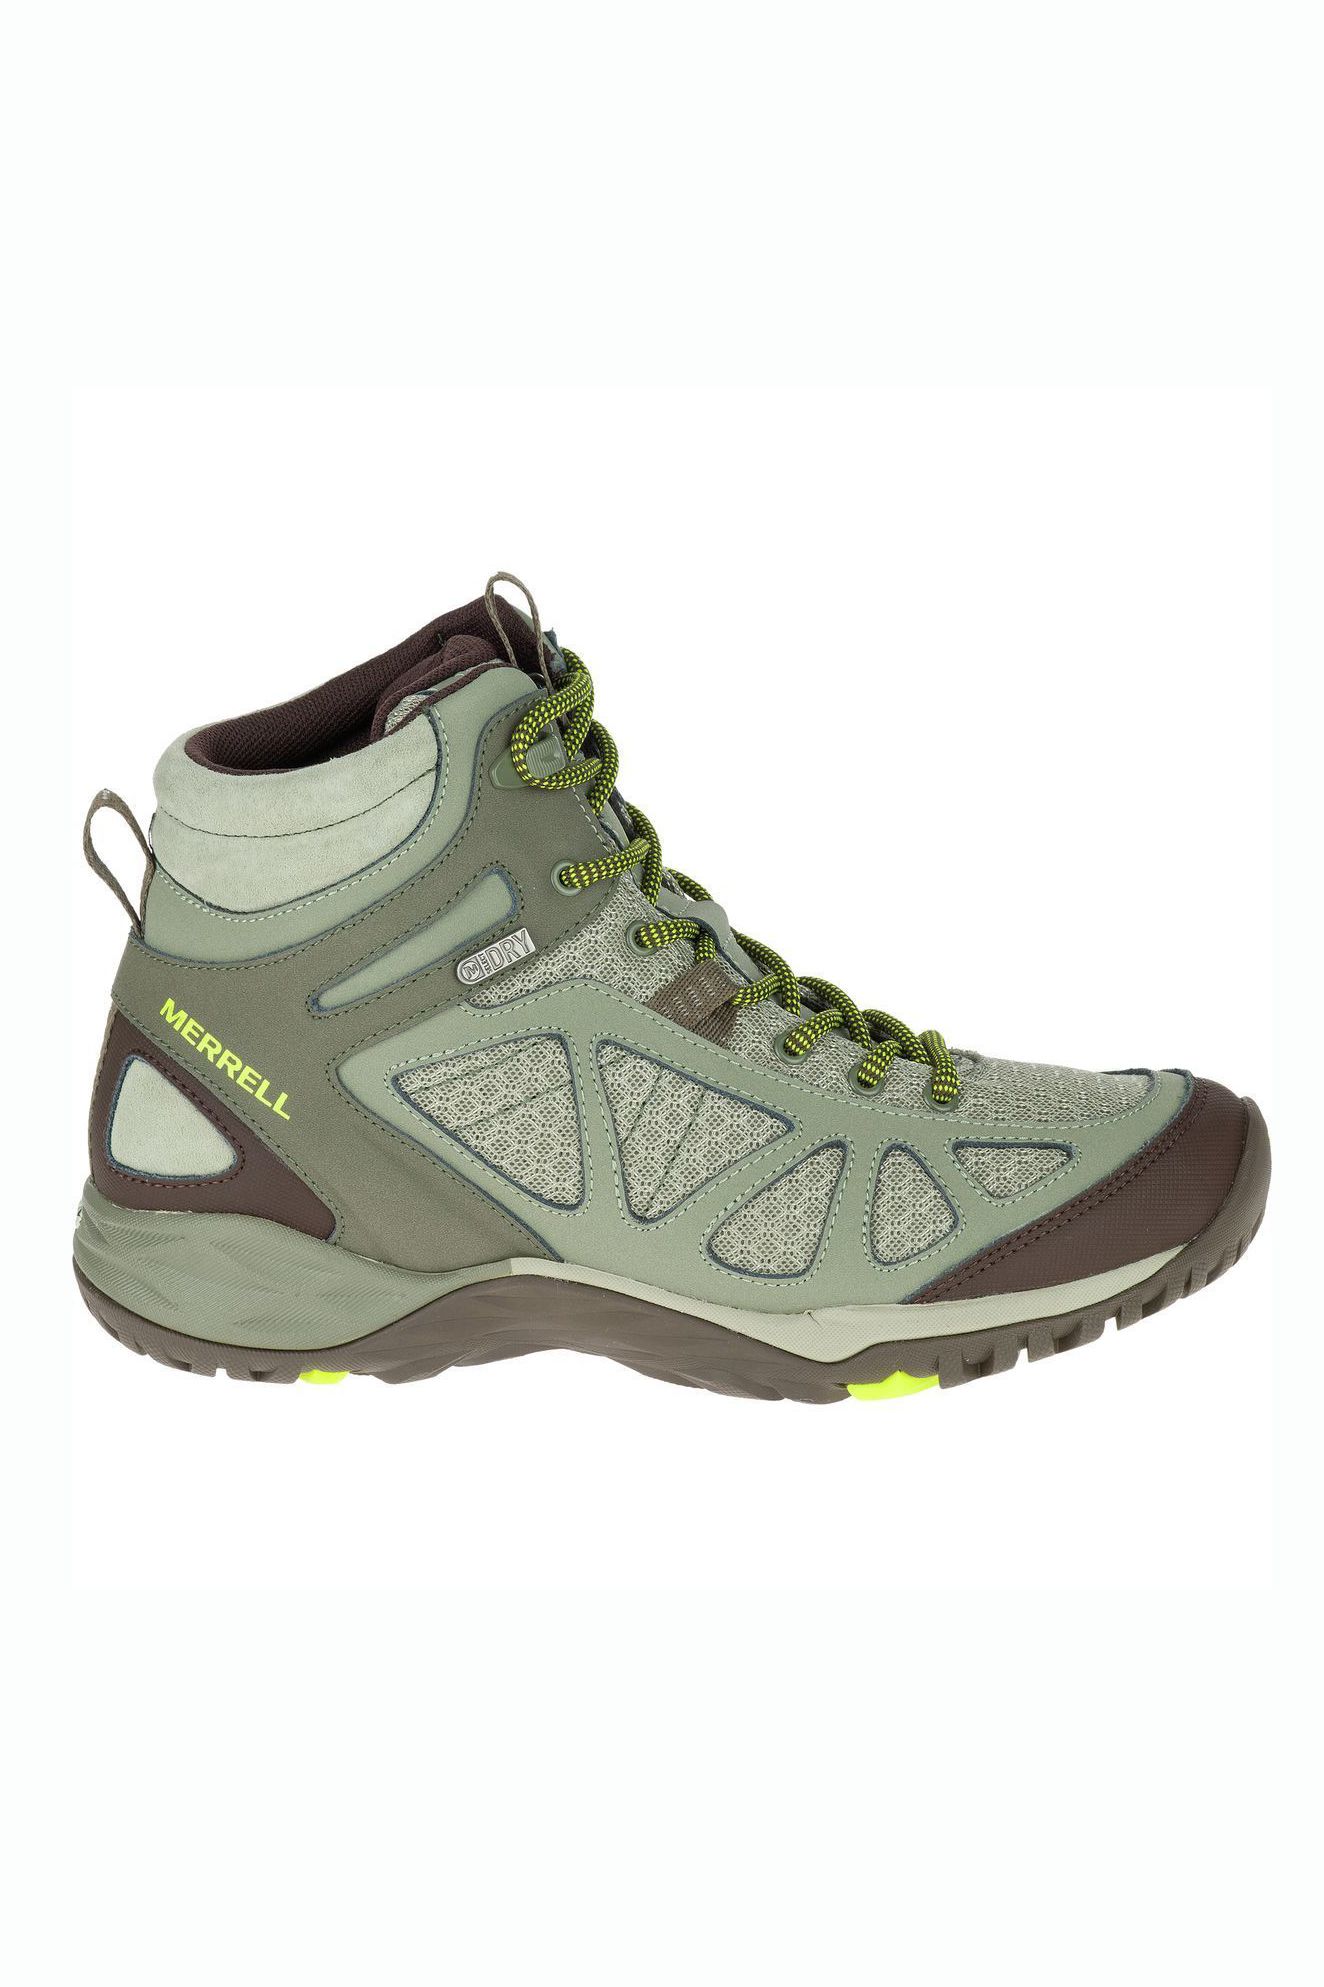 10 Best Hiking Boots for Women - Top 